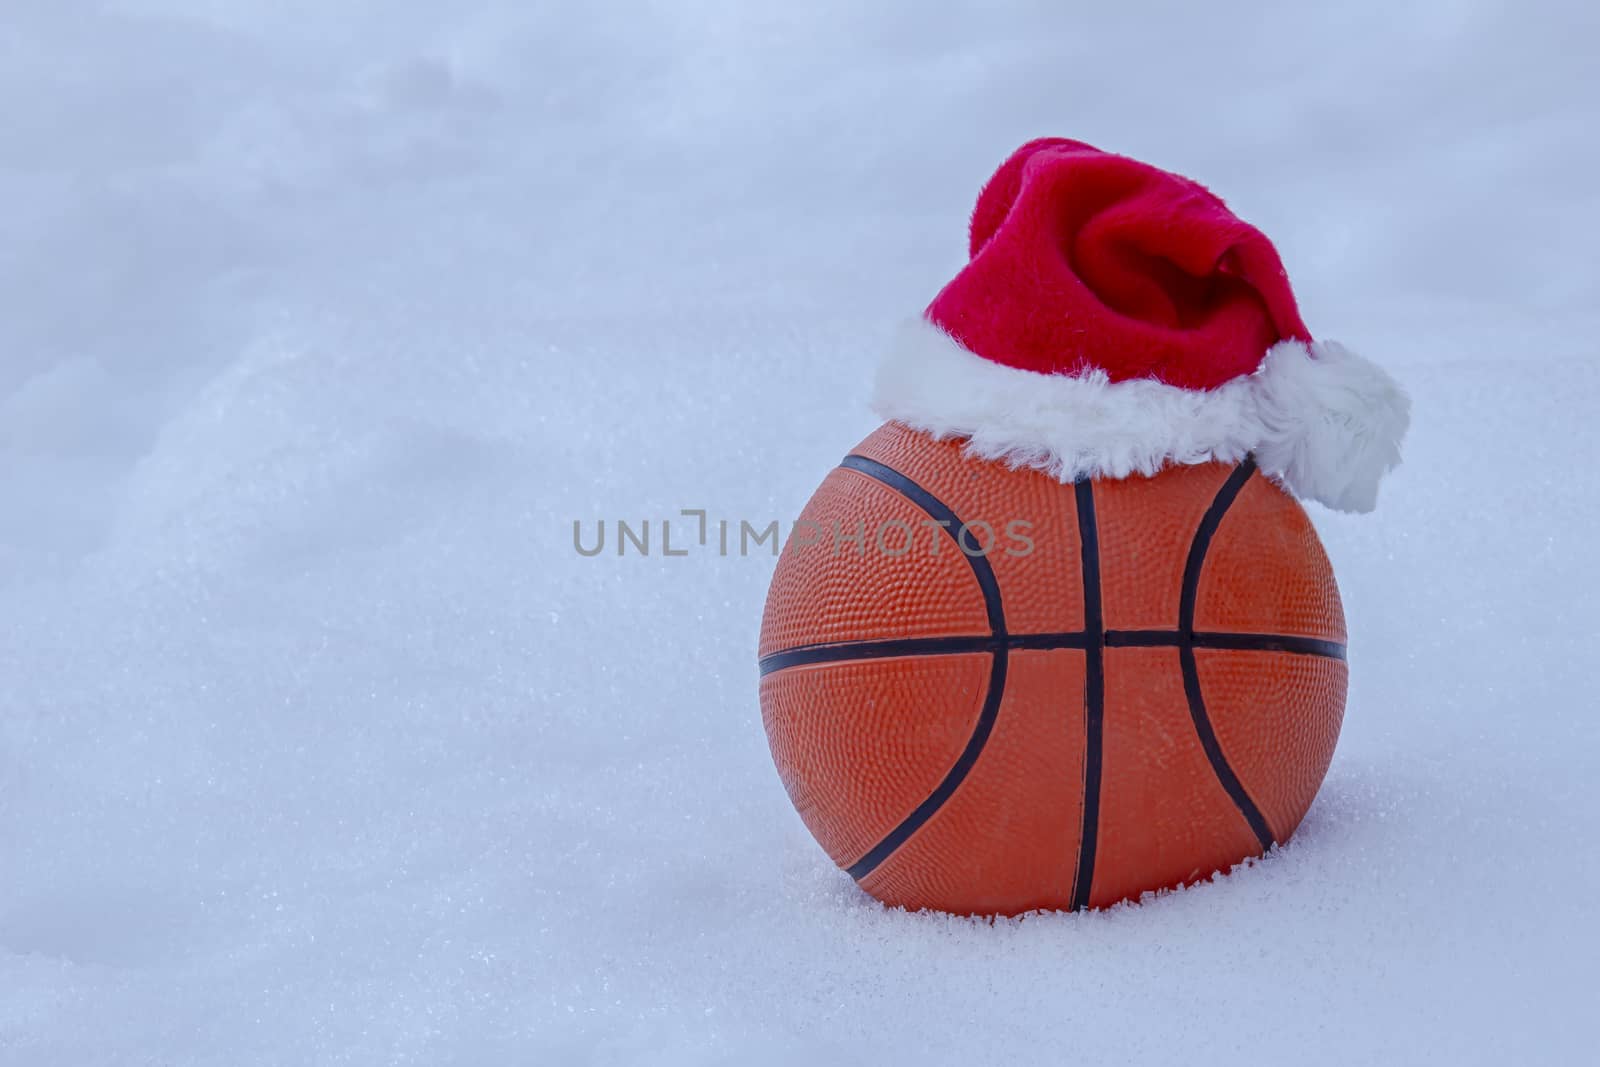 Basket ball wearing a santa hat on snow during winter by oasisamuel